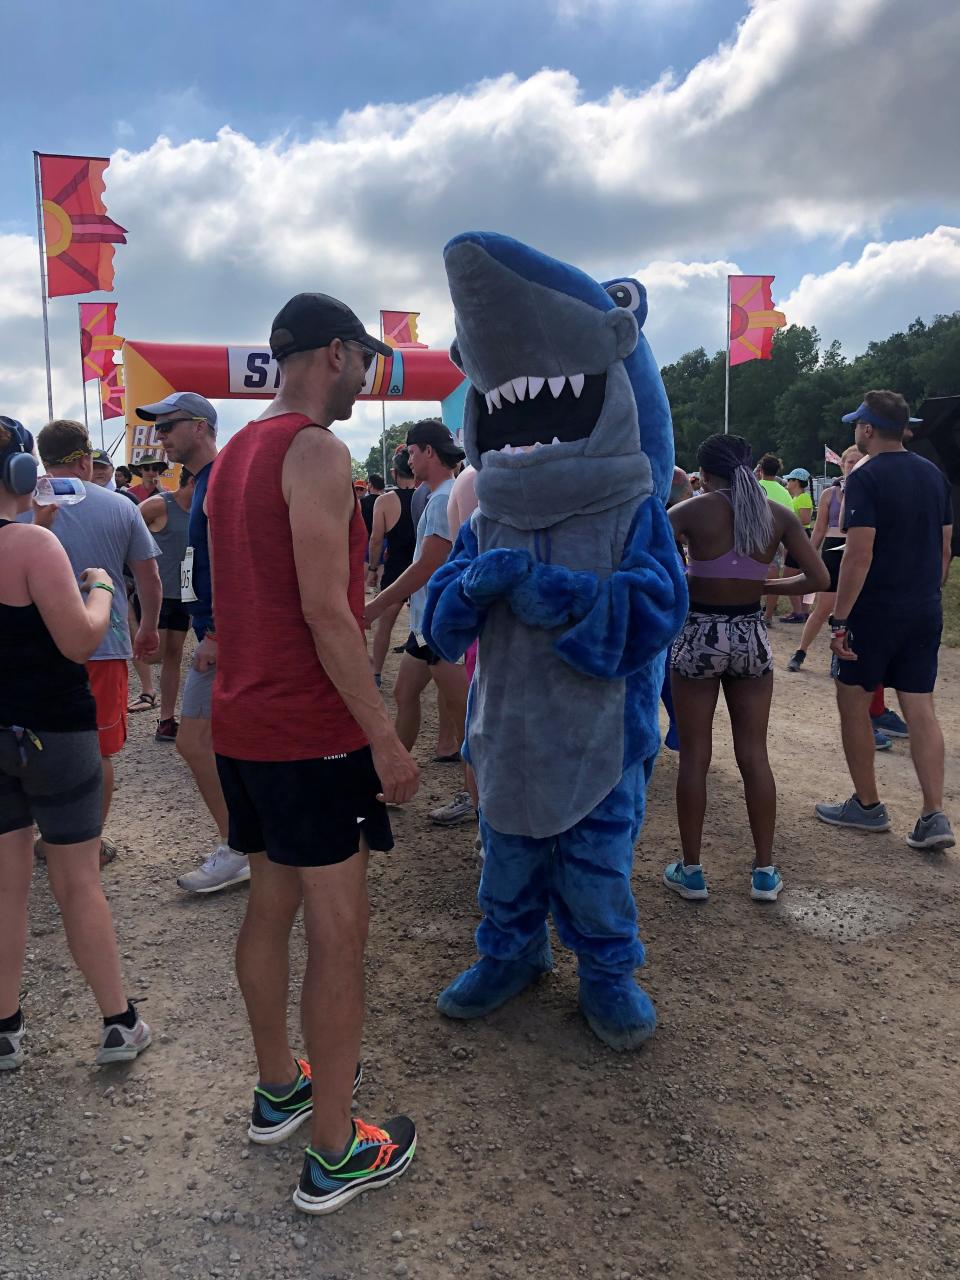 Despite the 80-degree temperature Saturday morning, this brave soul ran the entire 5K in a shark costume. When asked about it, he said "I had this shark costume at home, so I thought 'why not?' I mean isn't this weekend all about bad decisions?"